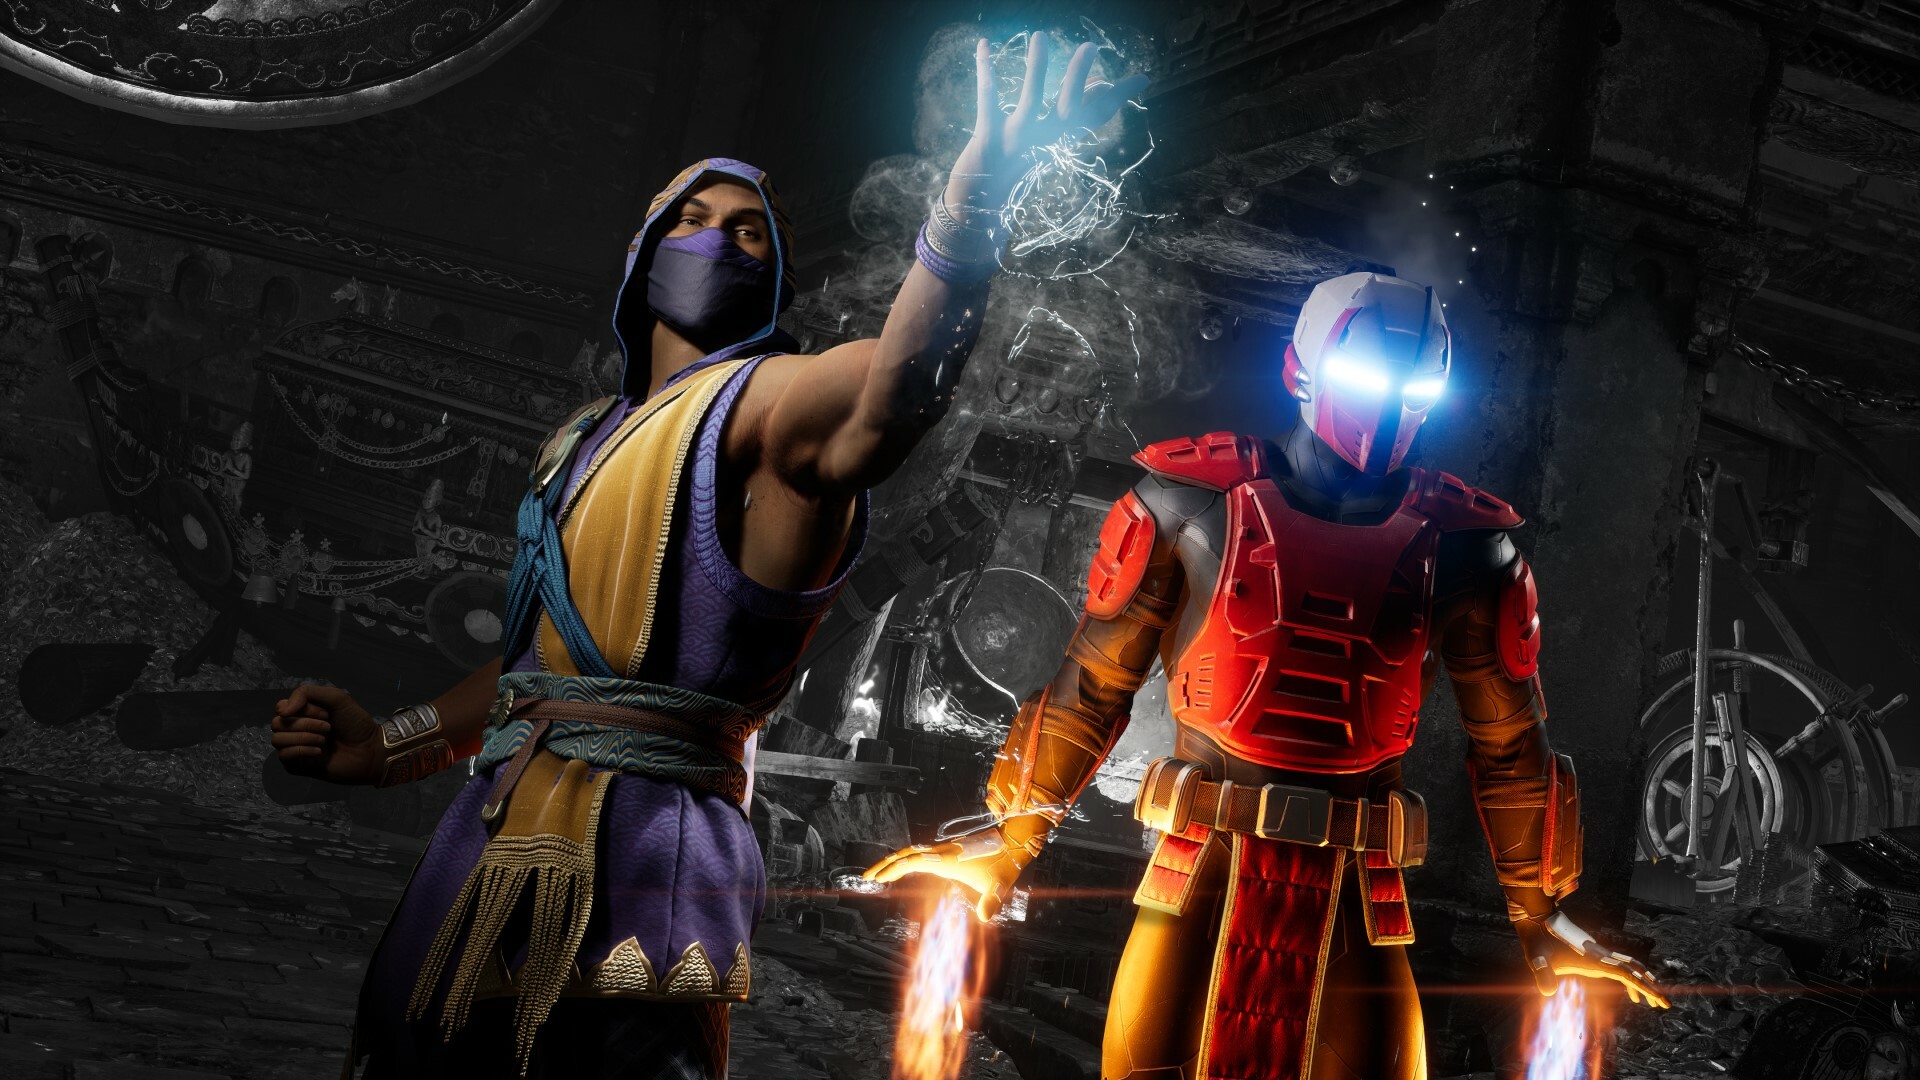 Mortal Kombat's first 12 minutes set up an epic, R-rated adventure